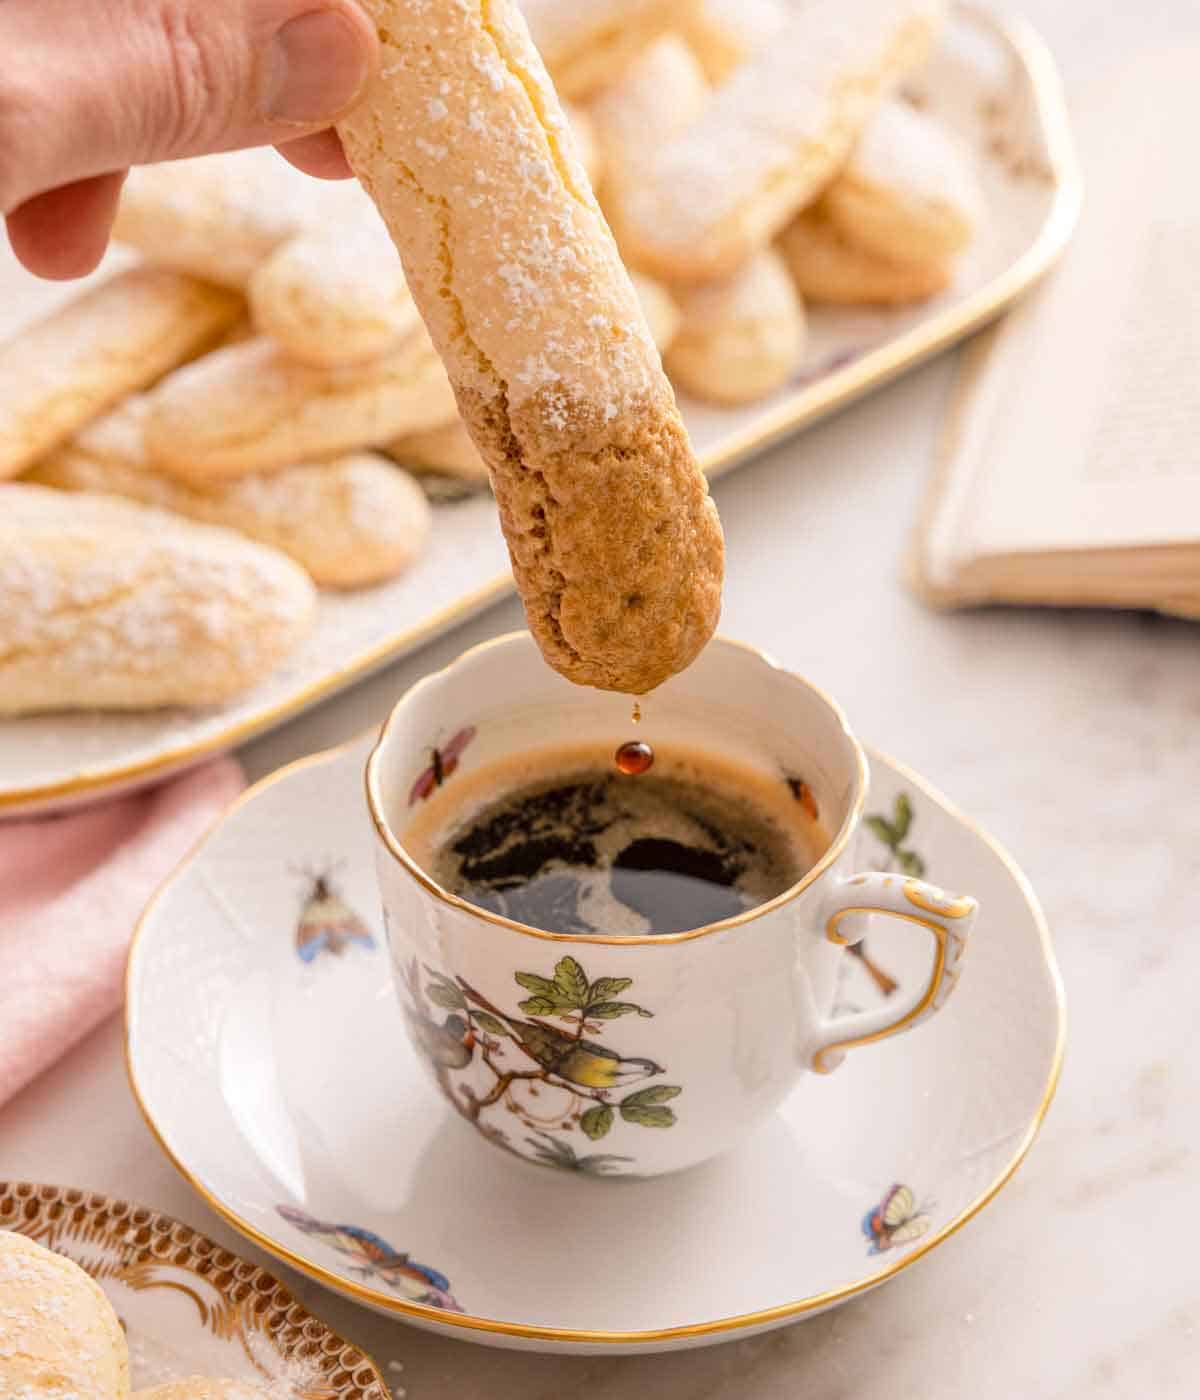 A ladyfinger dipped into a small cup of coffee.